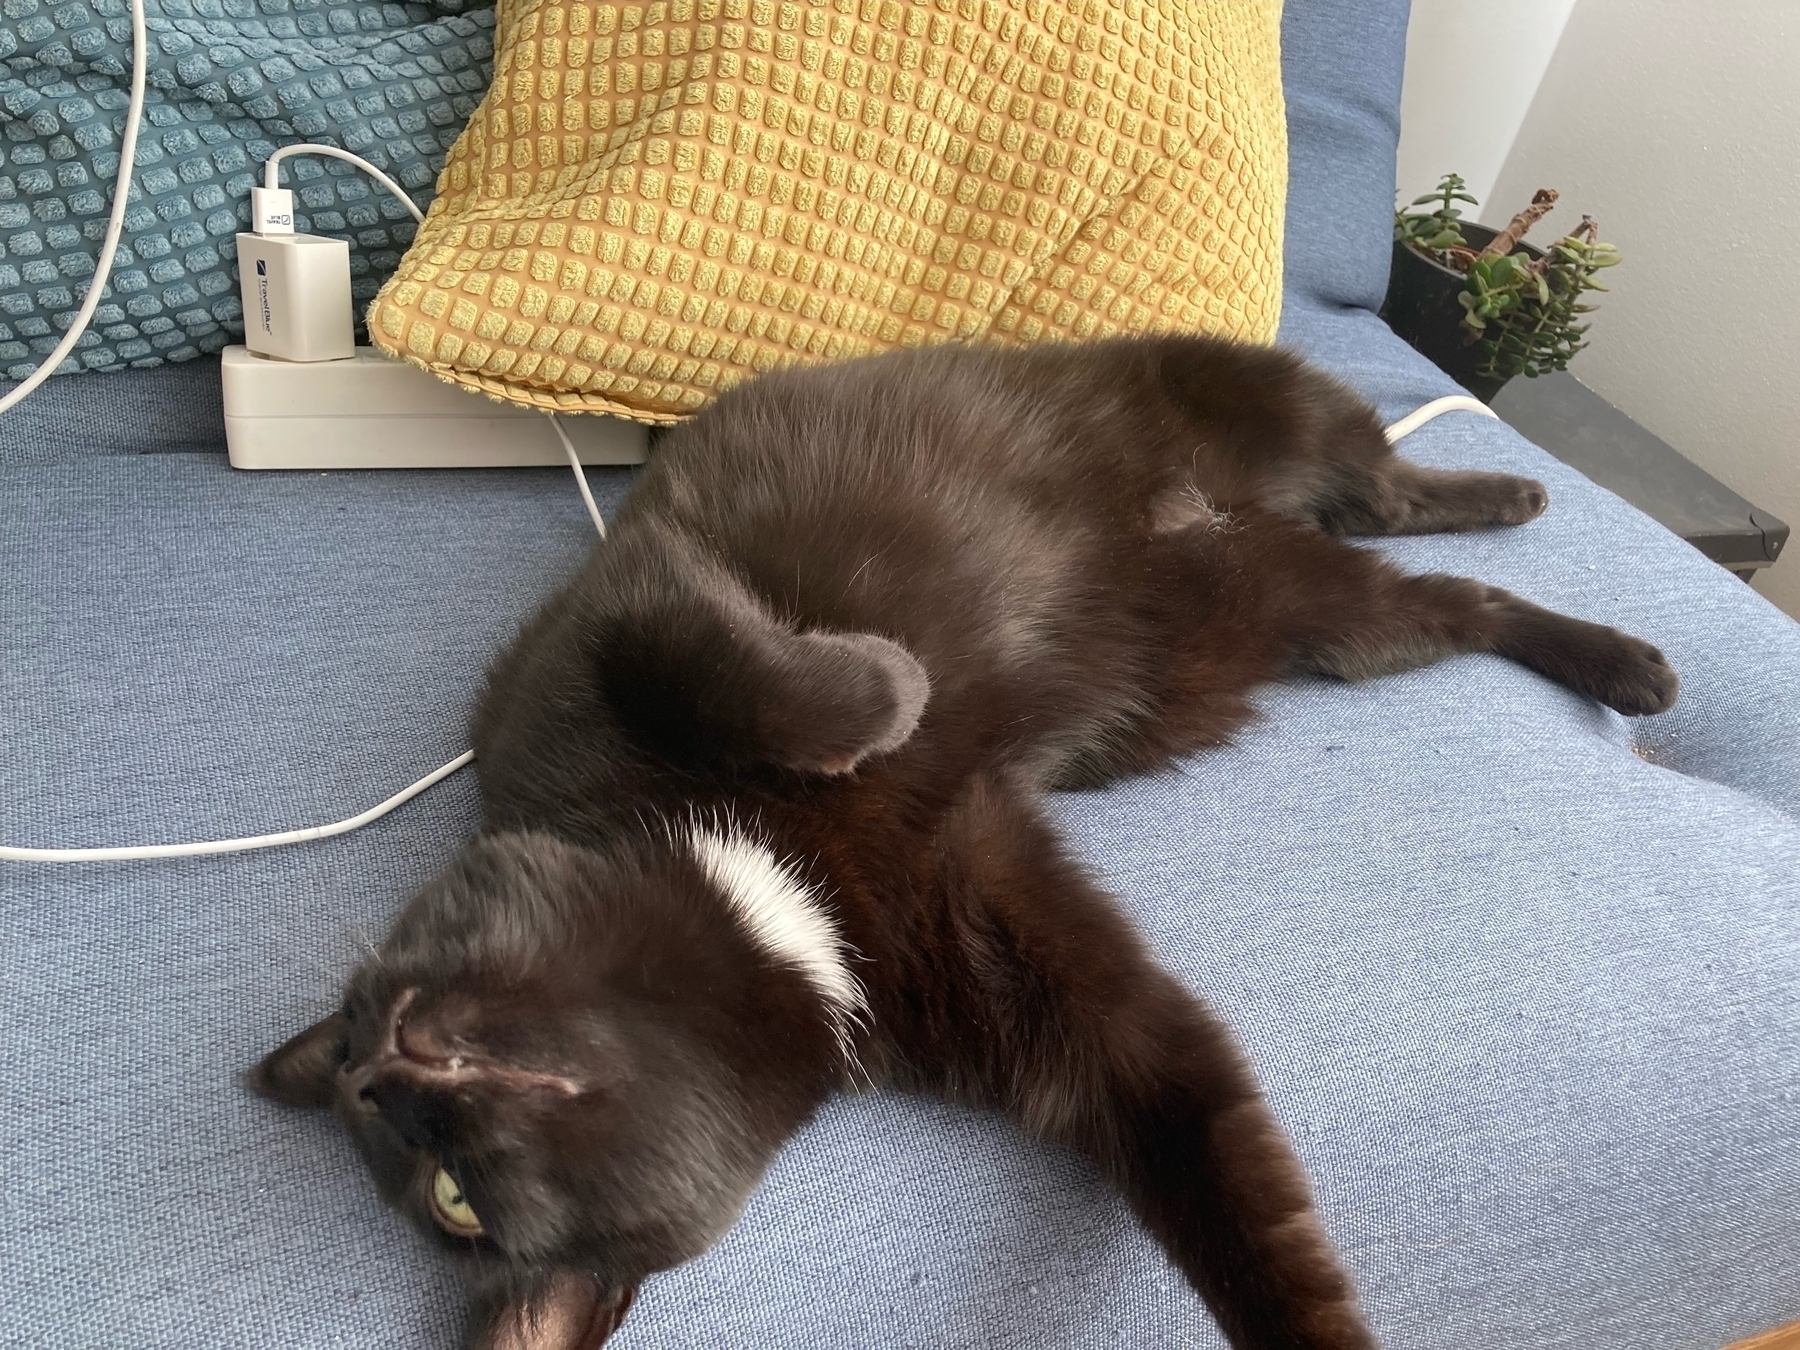 Kolka the cat observes the world upside down after she has half-rolled onto her back